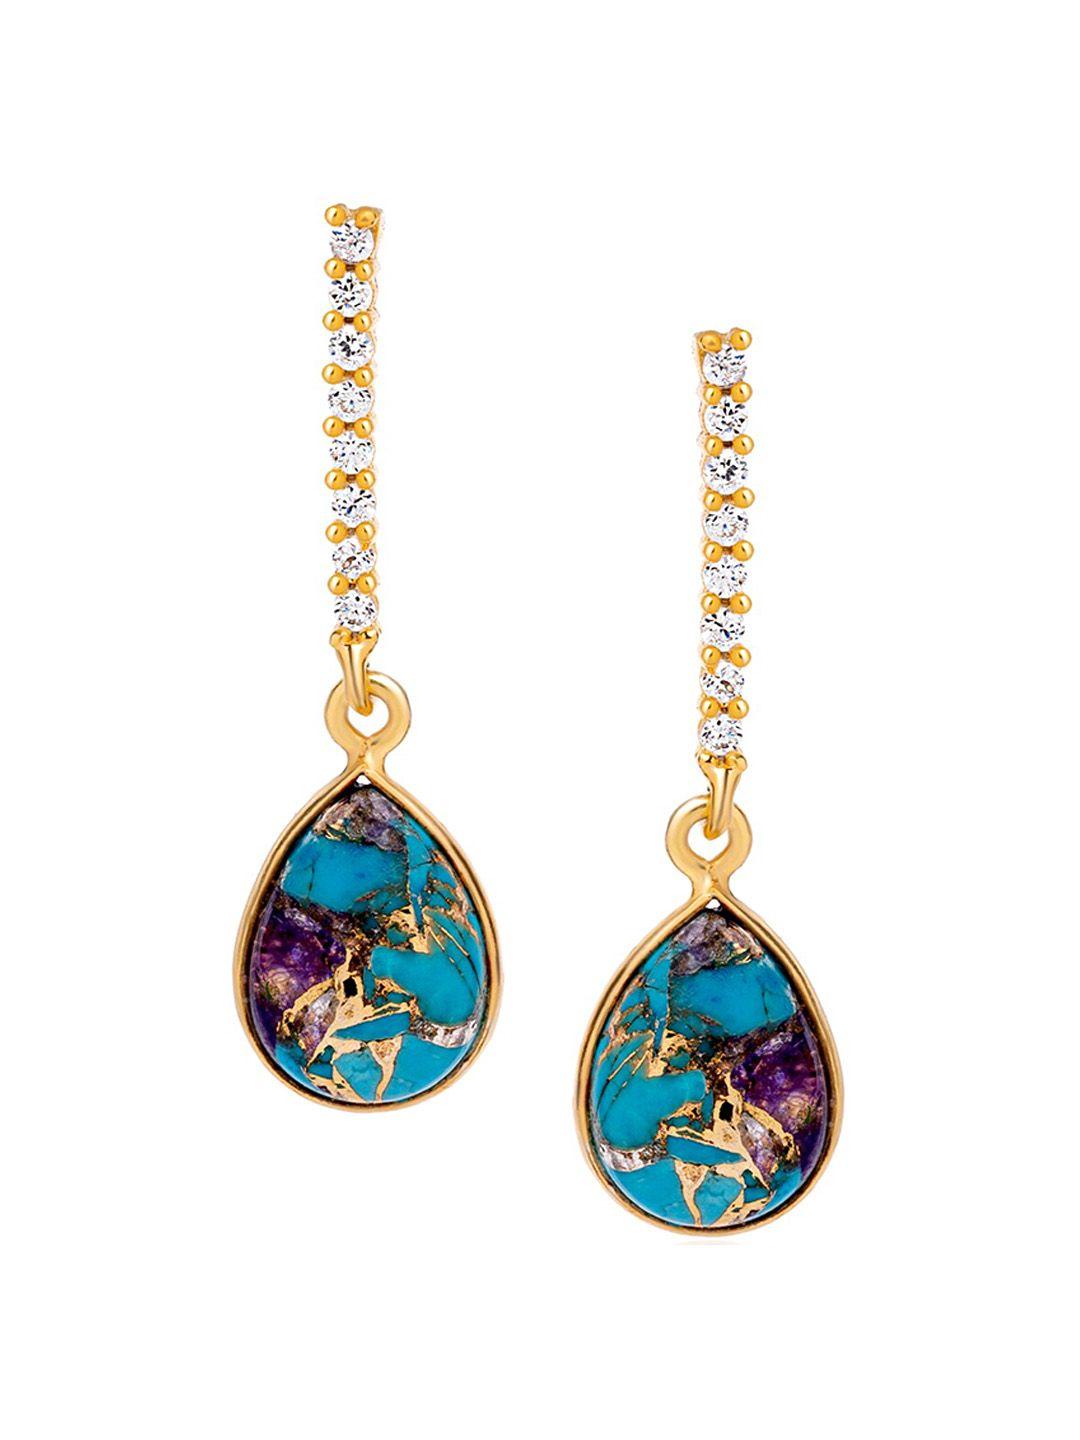 mikoto by fablestreet gold-plated teardrop turquoise drop earrings